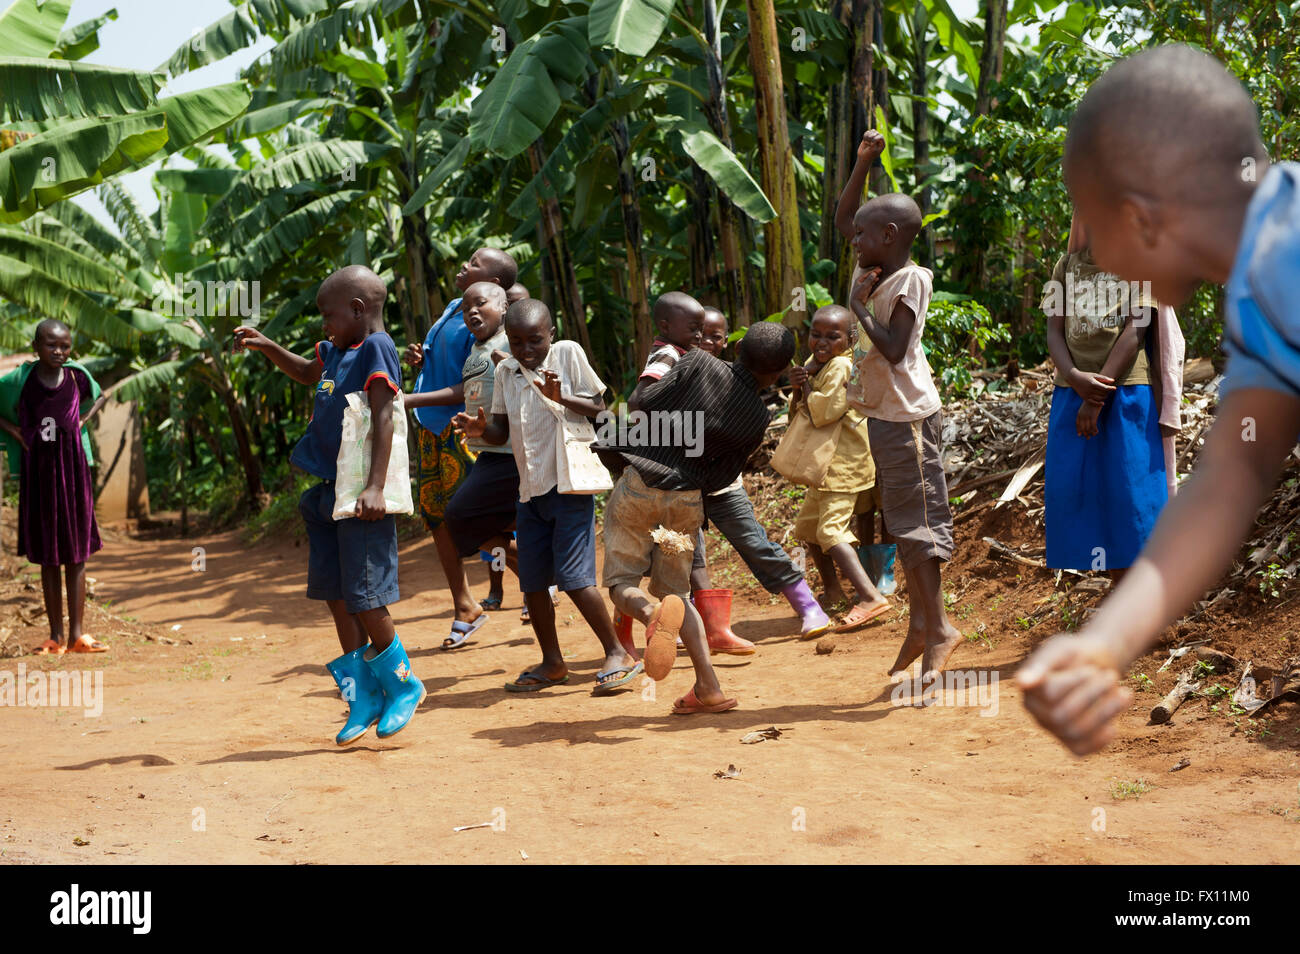 Group of Rwandan children playing a ball game on a dusty road and having fun. Stock Photo